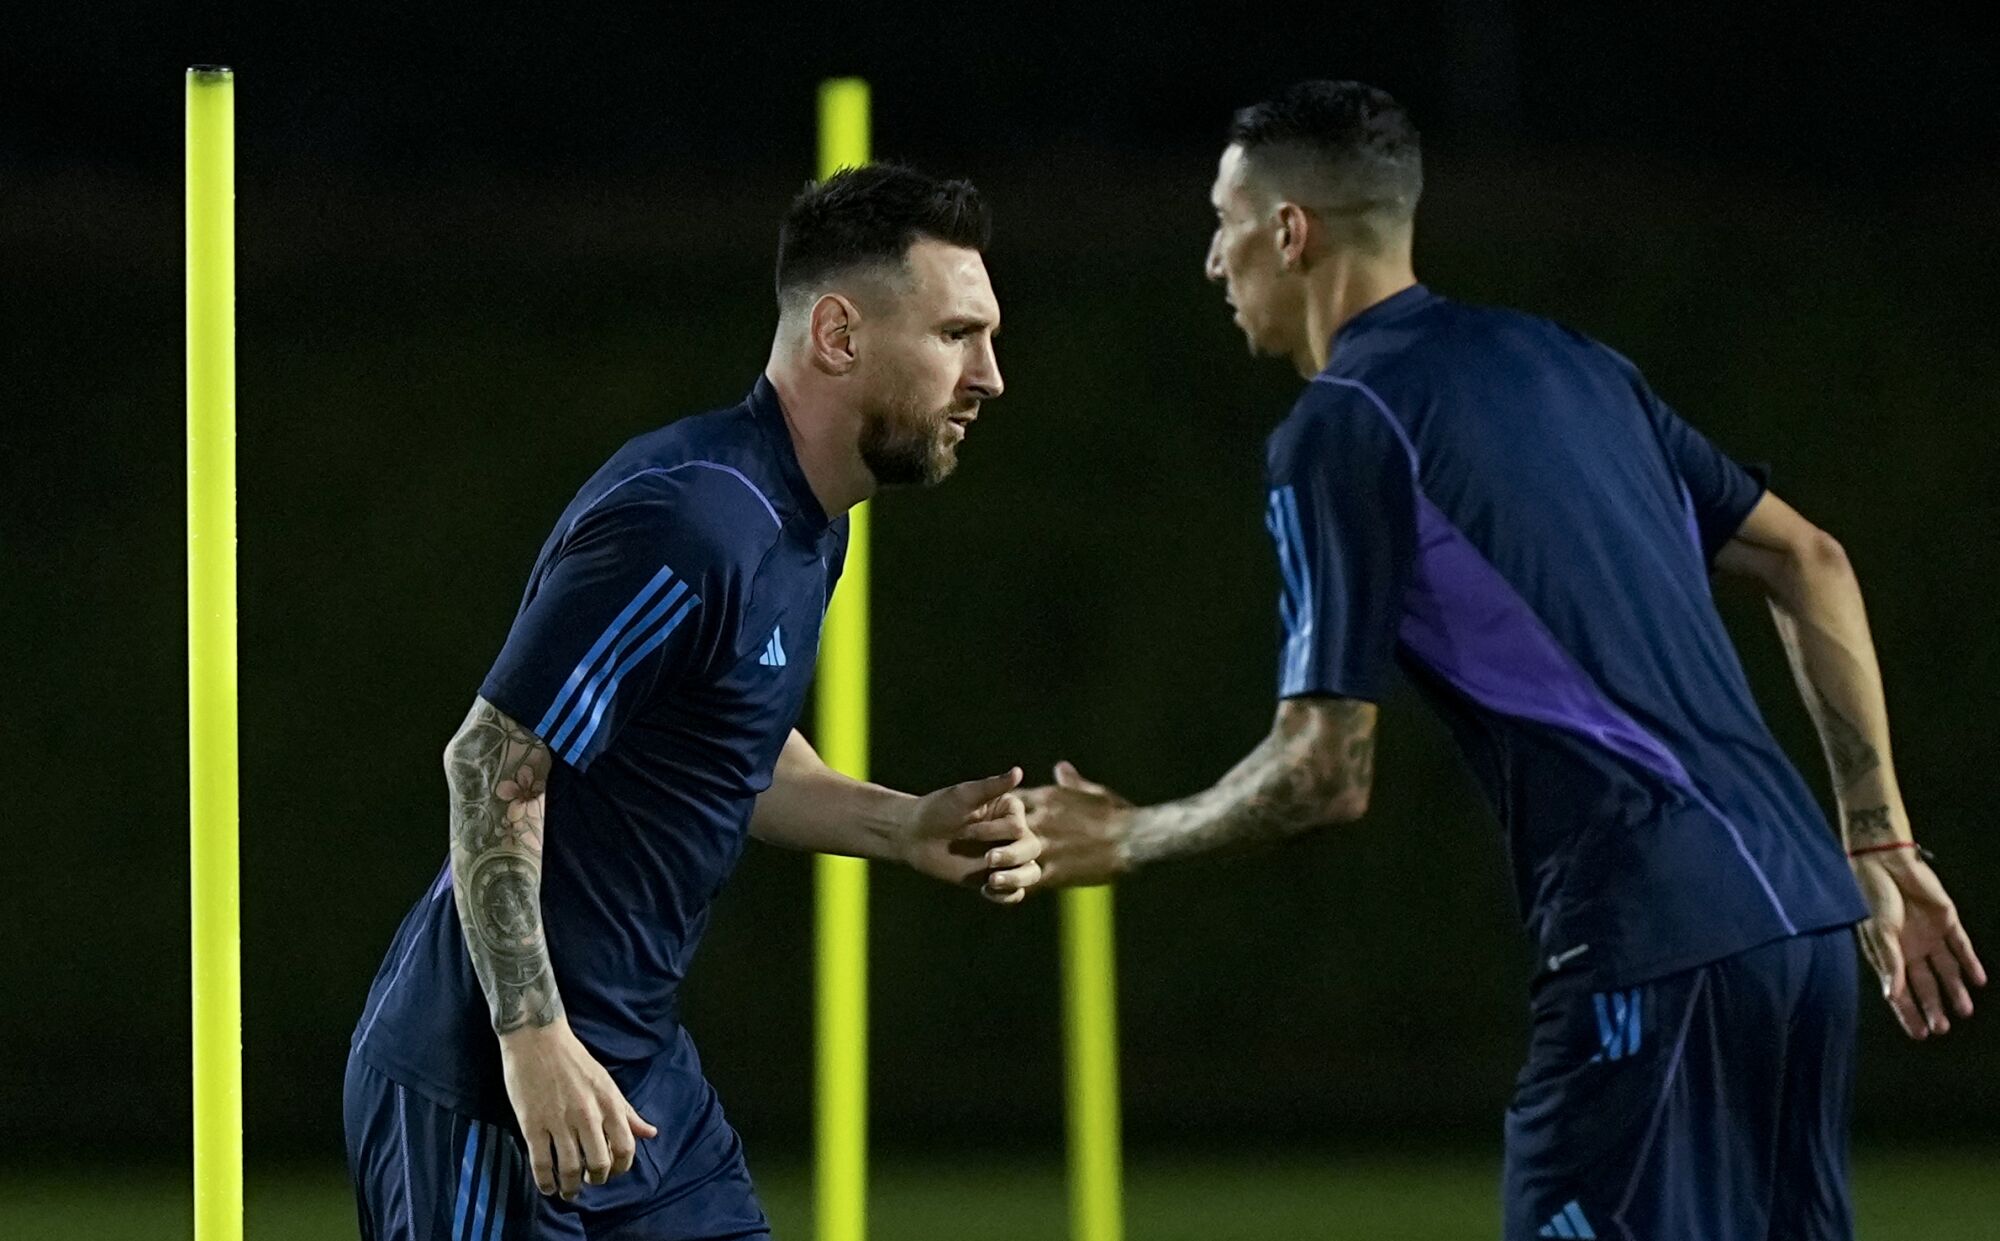 Argentina's Lionel Messi (left) and Angel Di Maria warm up during a training session in Doha, Qatar on Thursday.